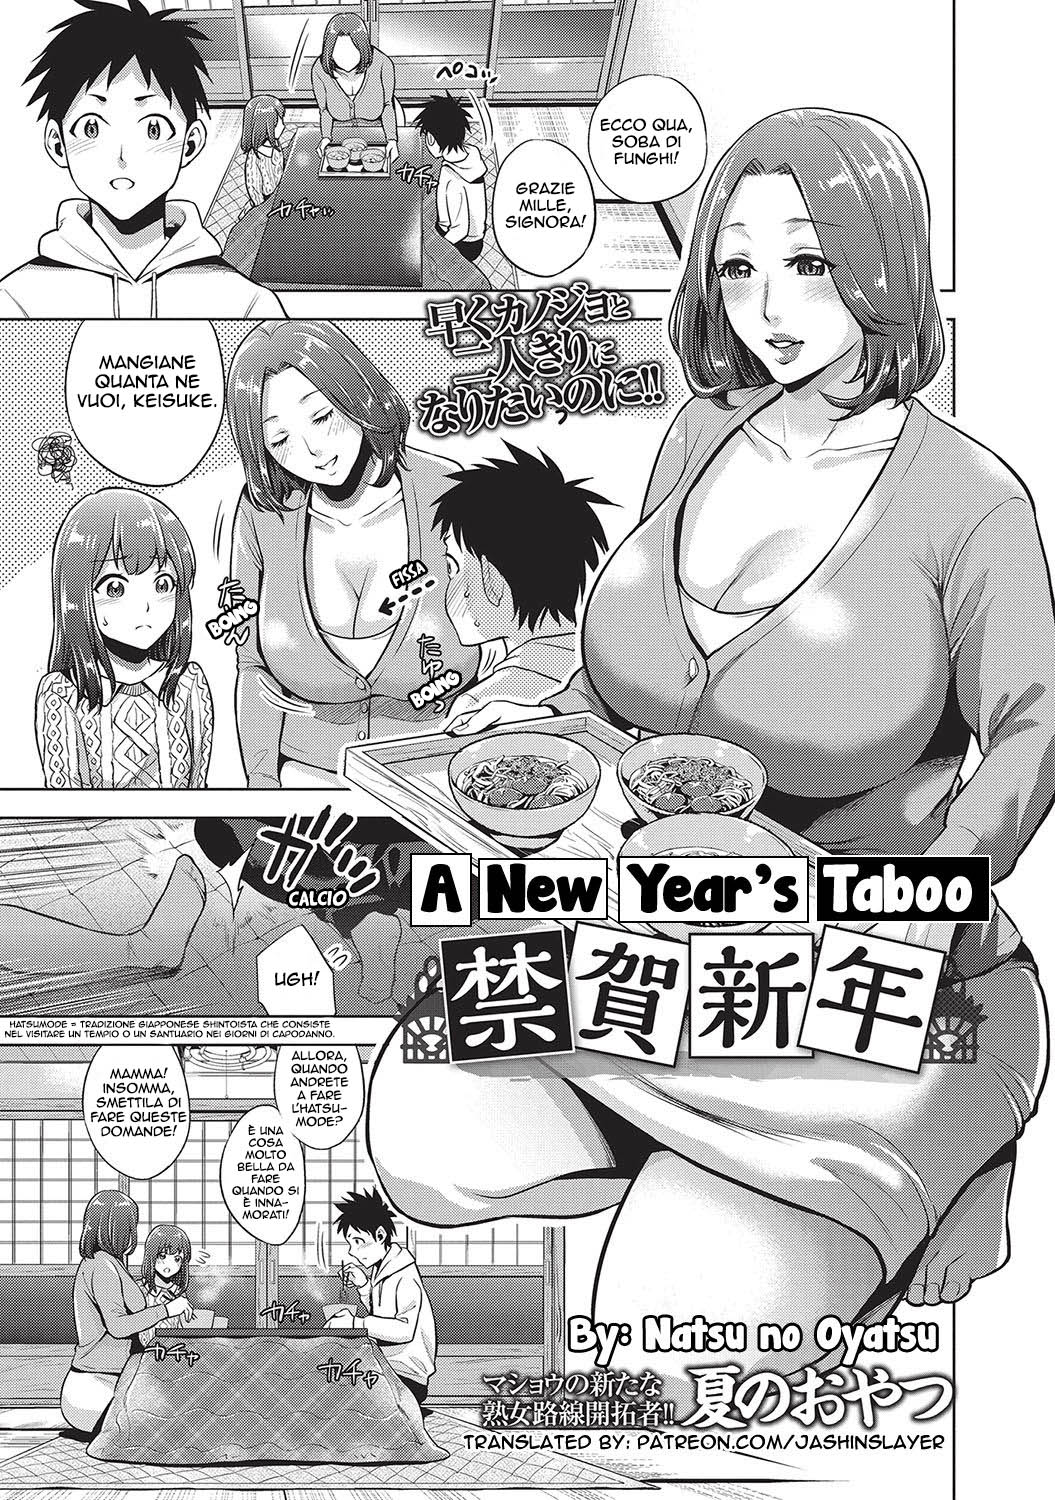 A New Year's Taboo